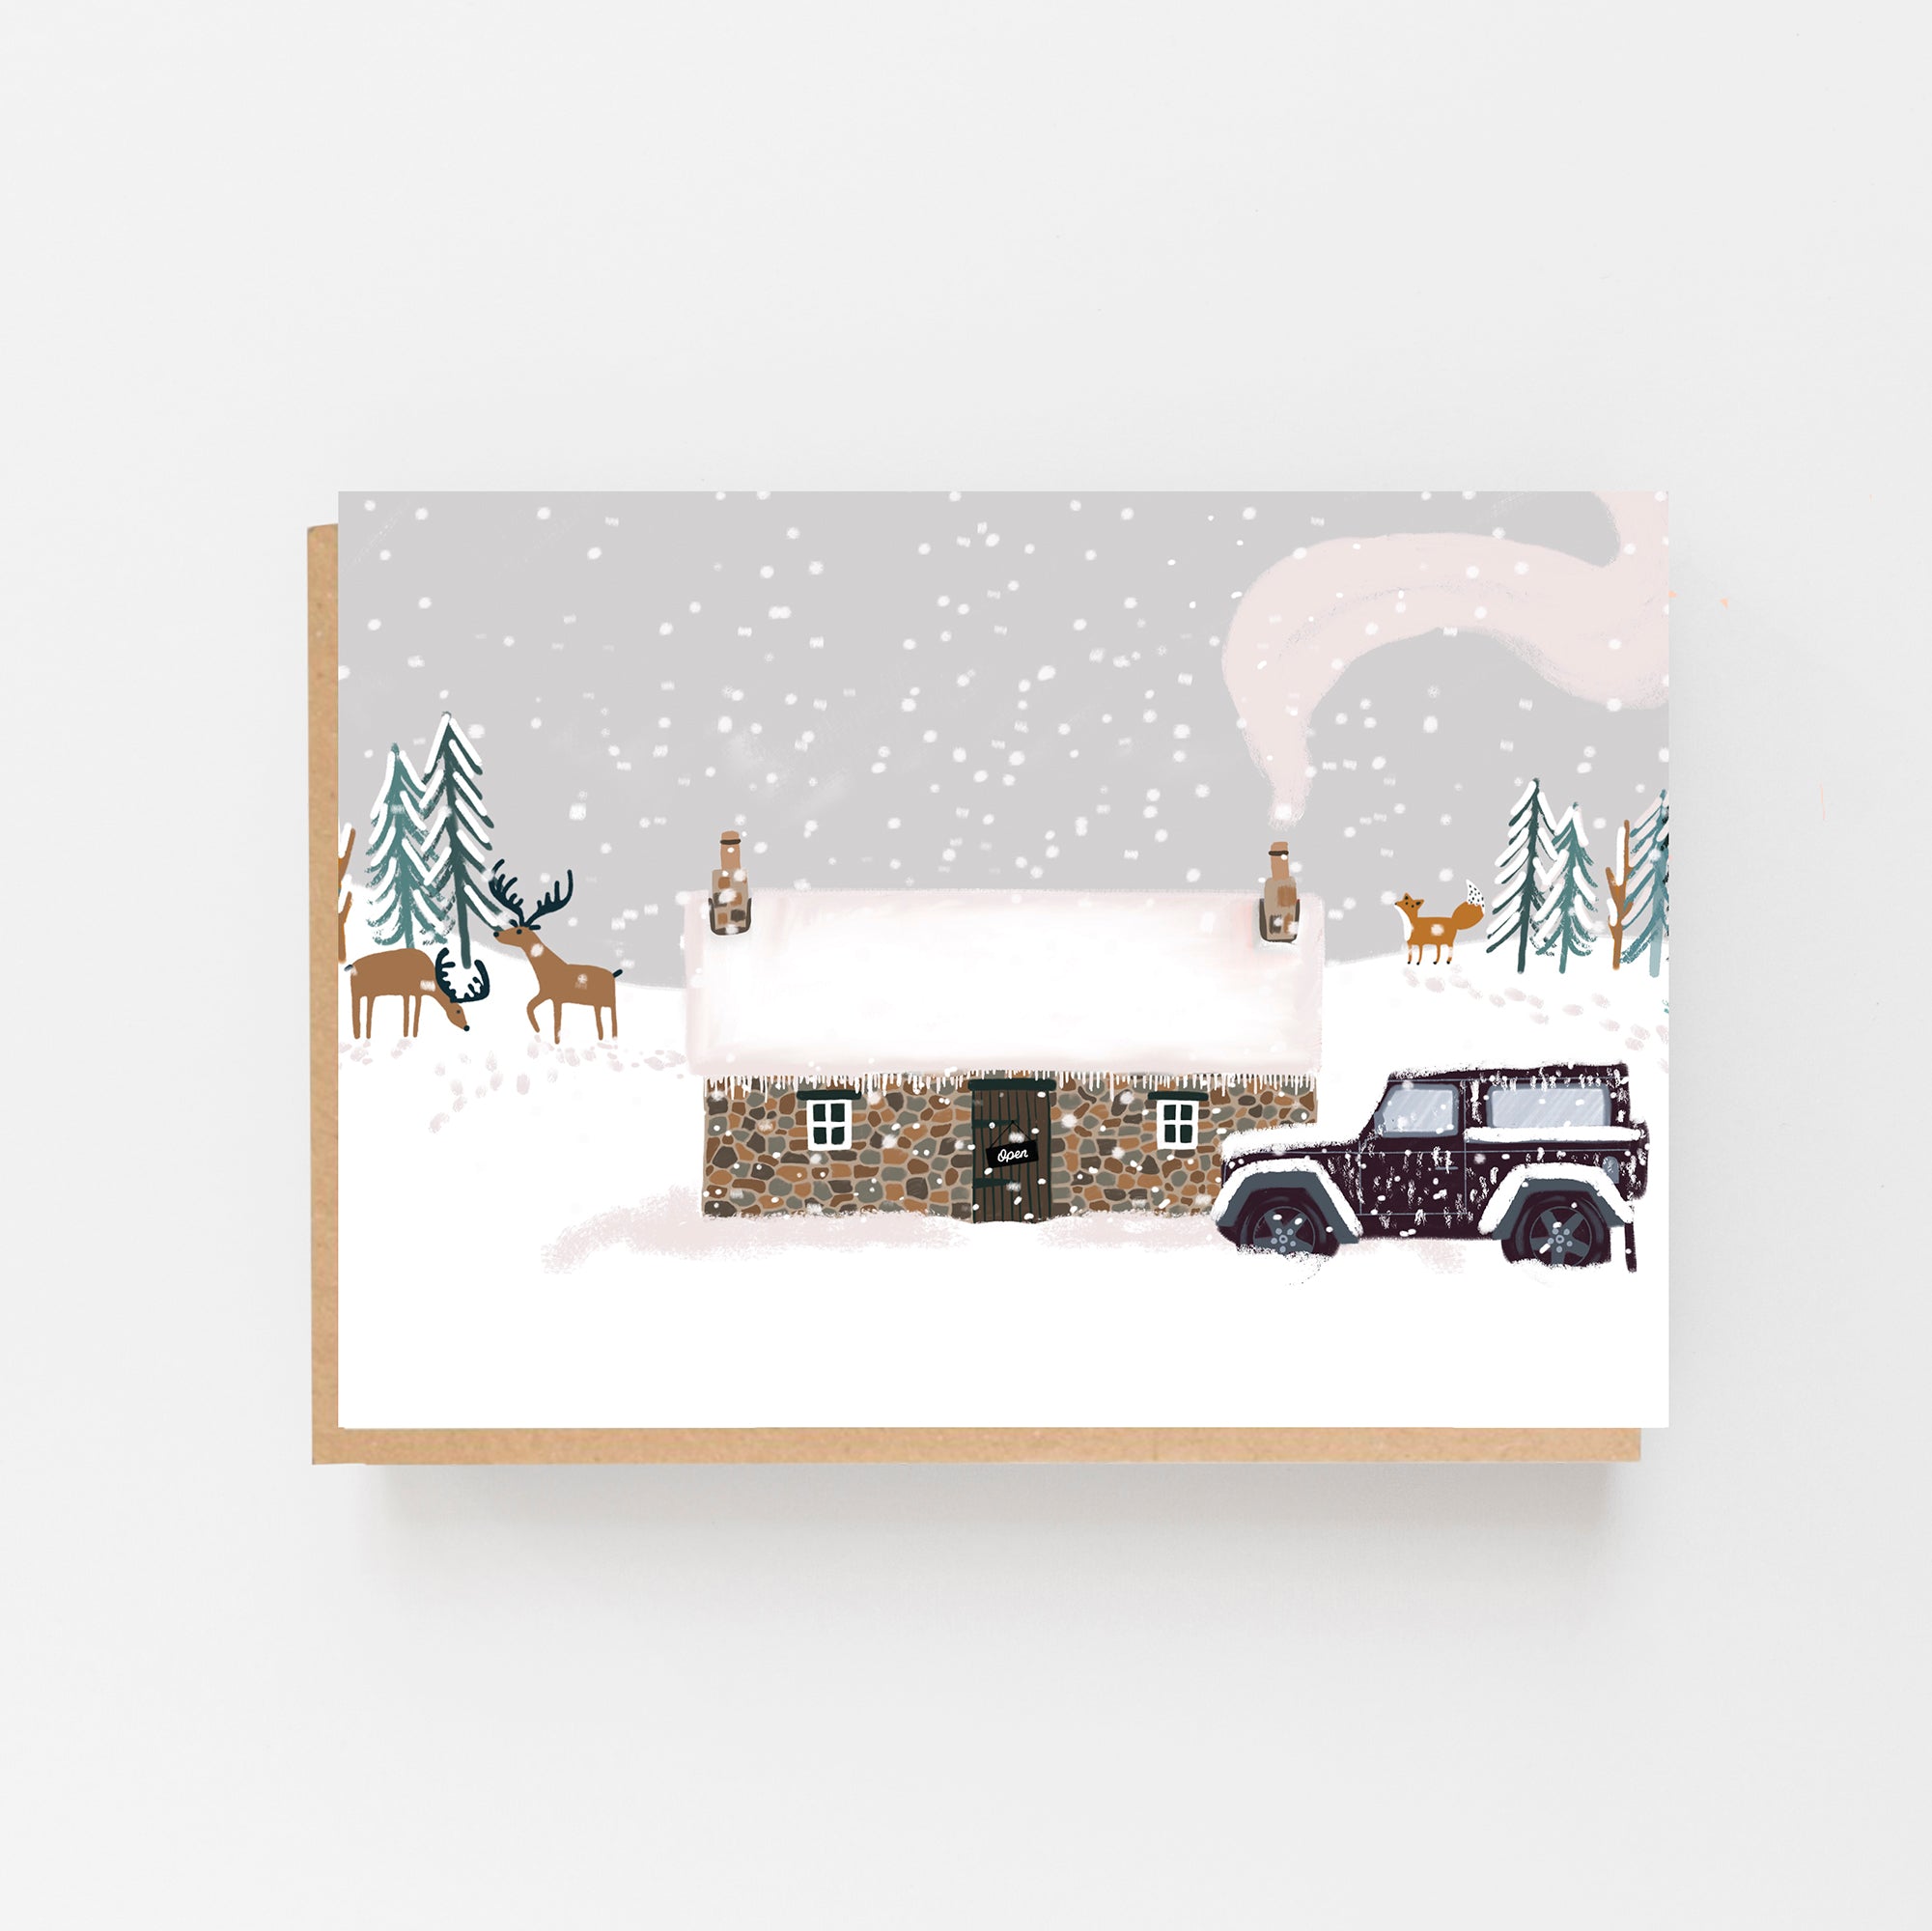 Bothy in the Snow - Blank Christmas Card